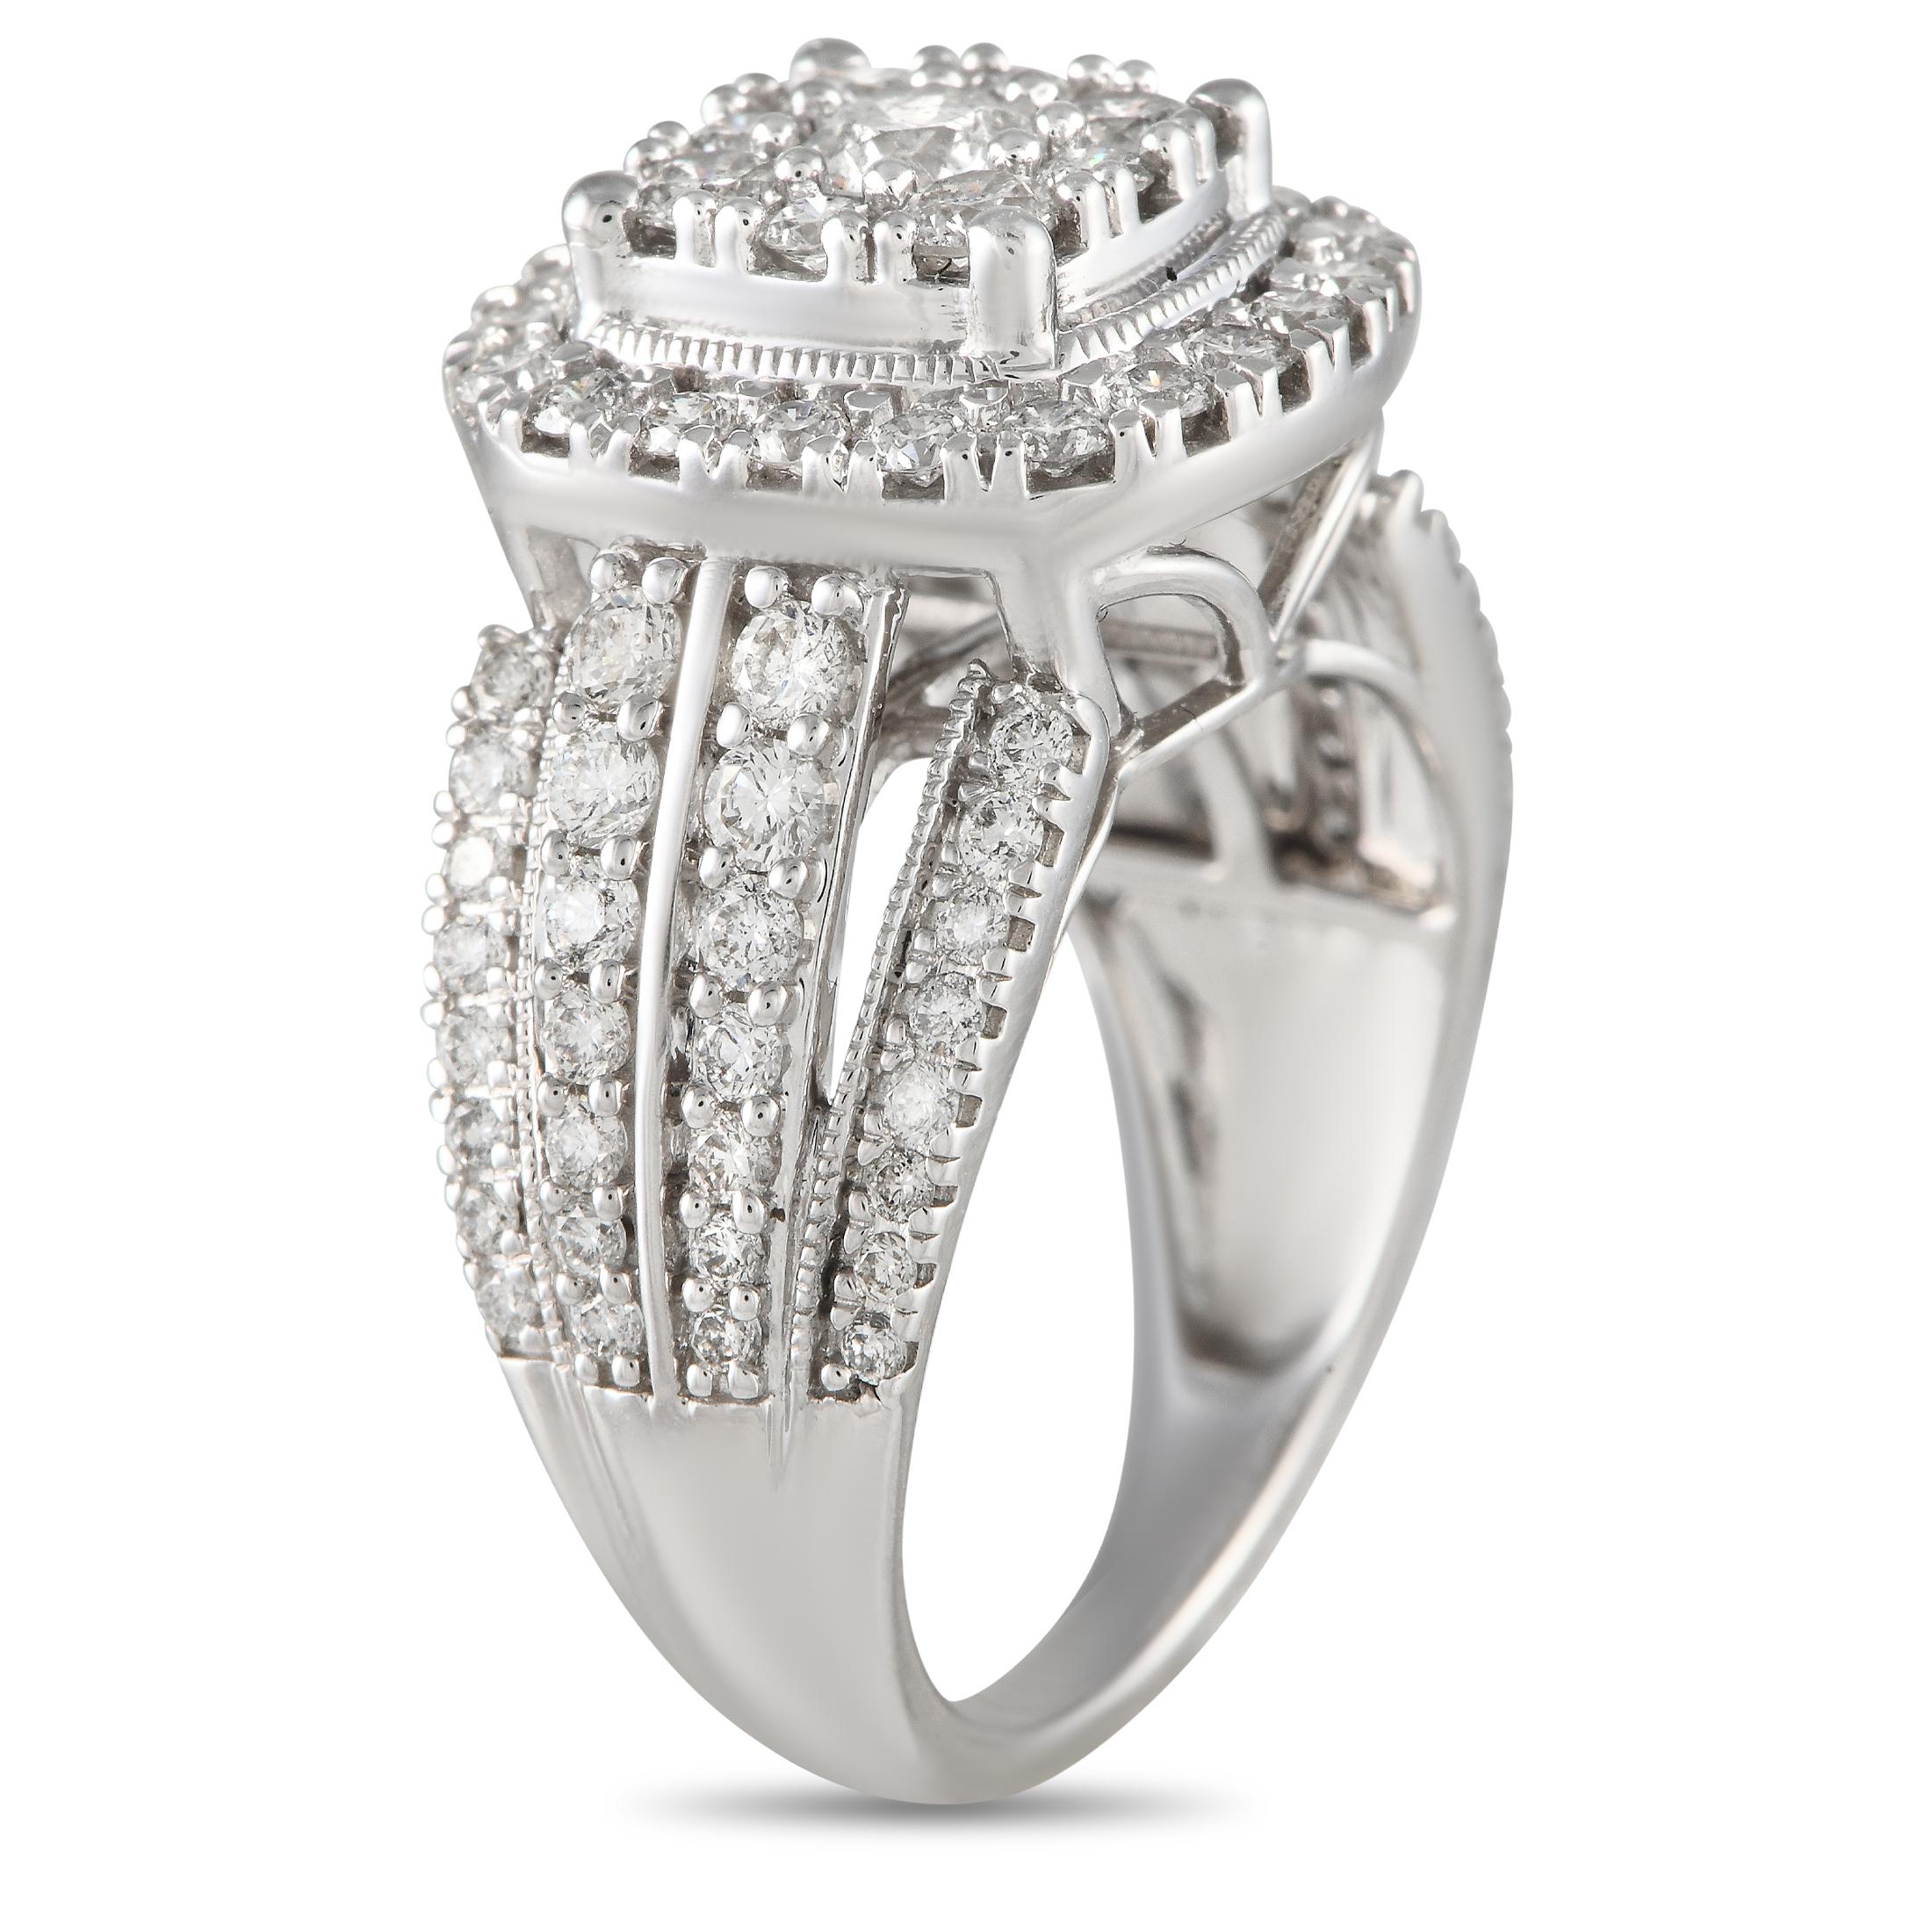 An elaborate, vintage-inspired diamond ring sure to win the heart of an old soul. This 14K white gold piece features a tapering shank with multi-split shoulders embellished with petite diamonds. At its top center is a round diamond surrounded by a